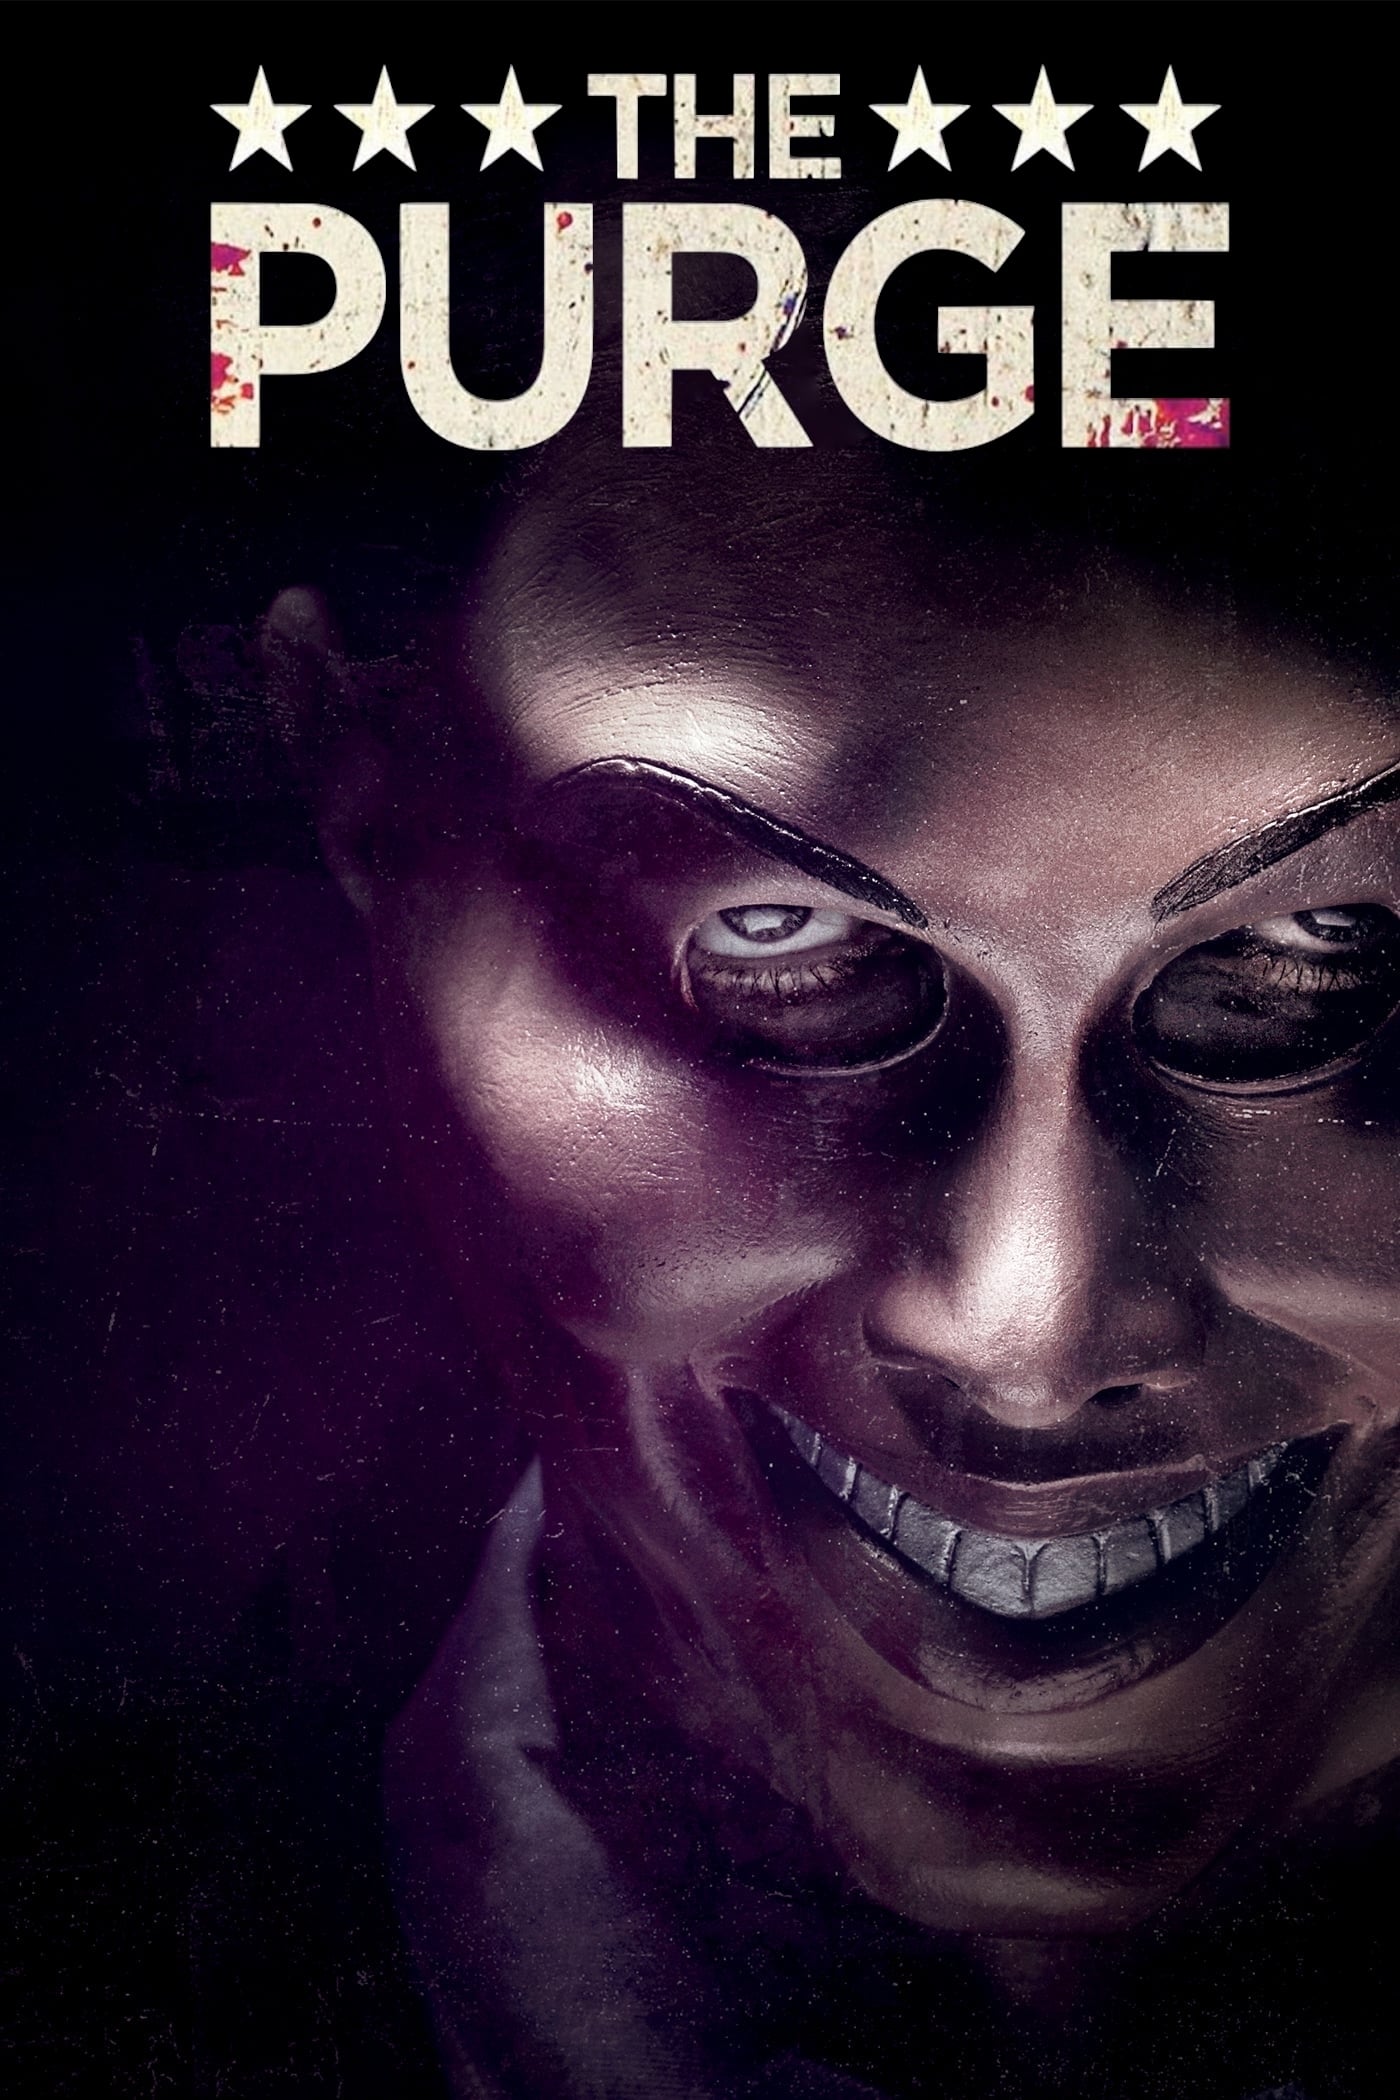 The Purge Movie poster